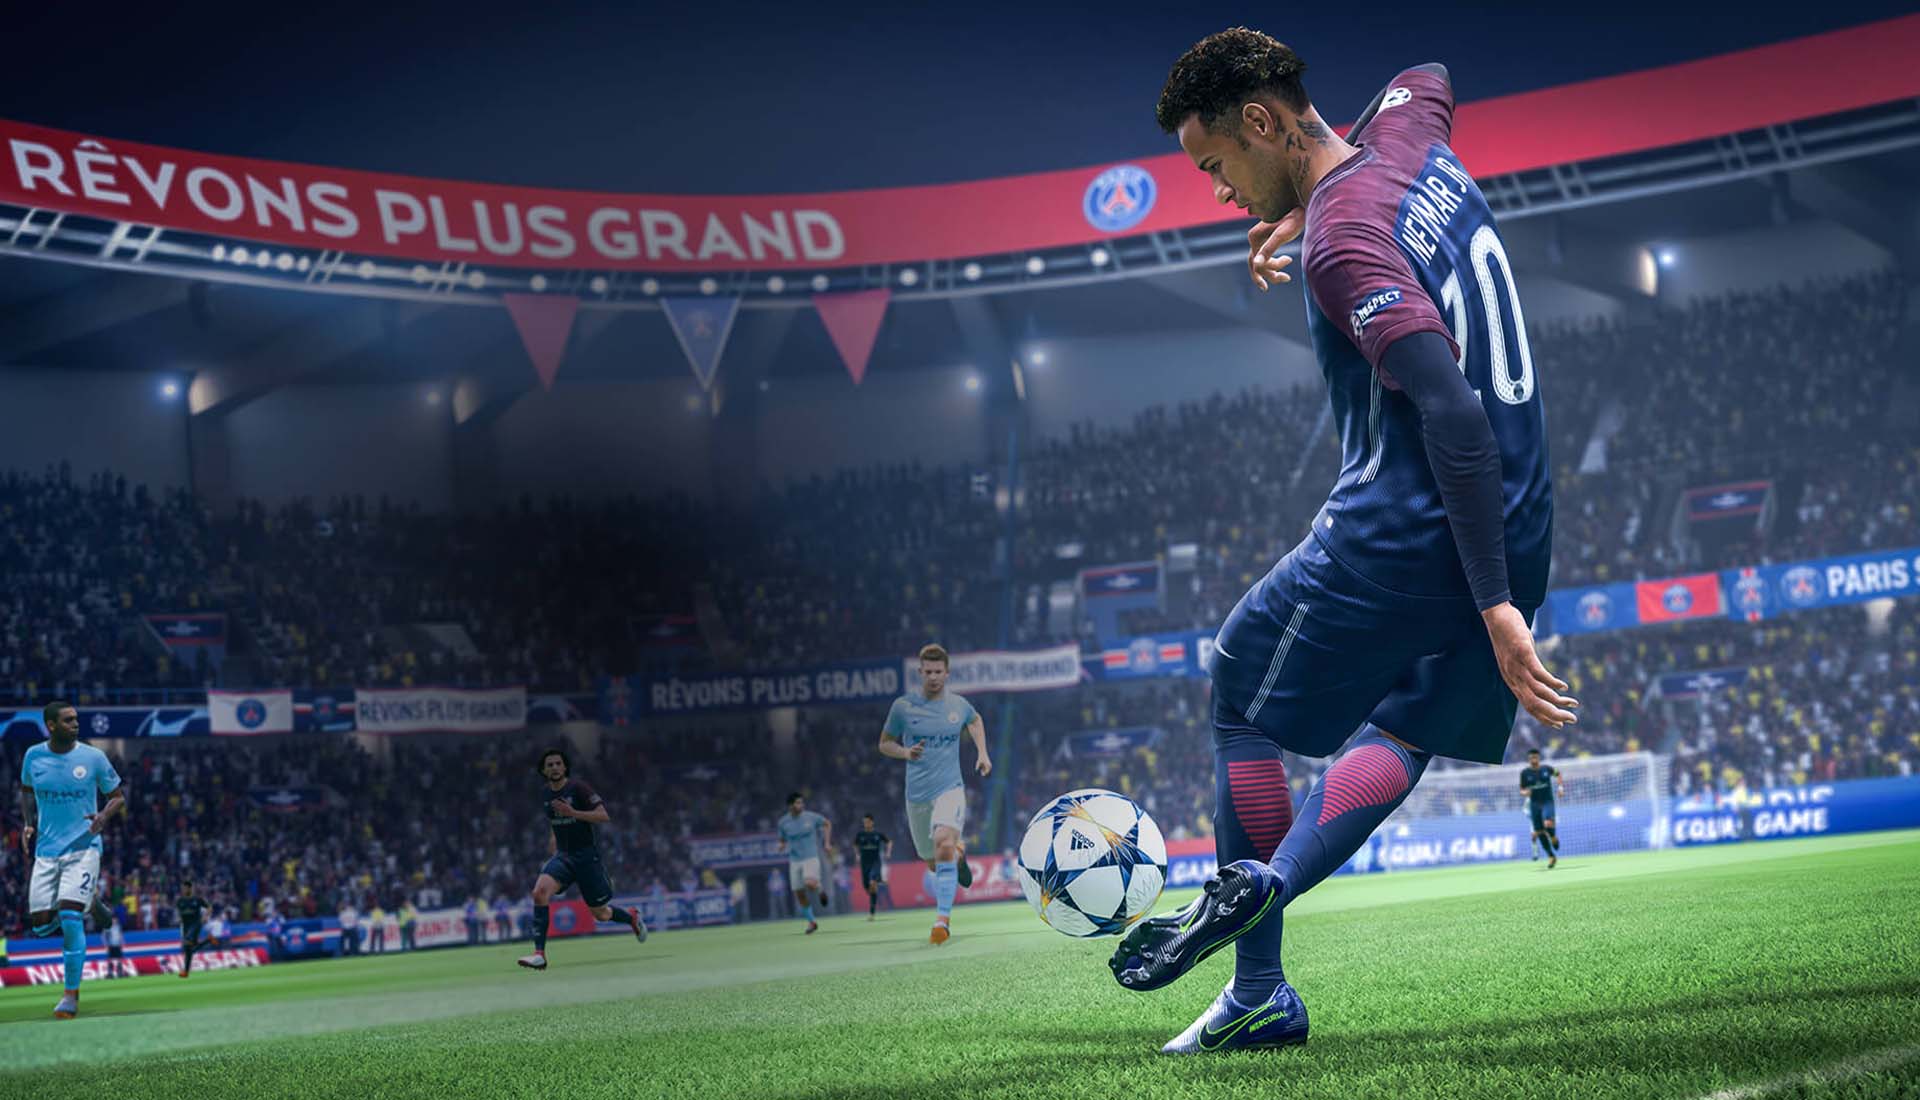 Tips and tricks to make anyone a top player in EA Sports’ FIFA